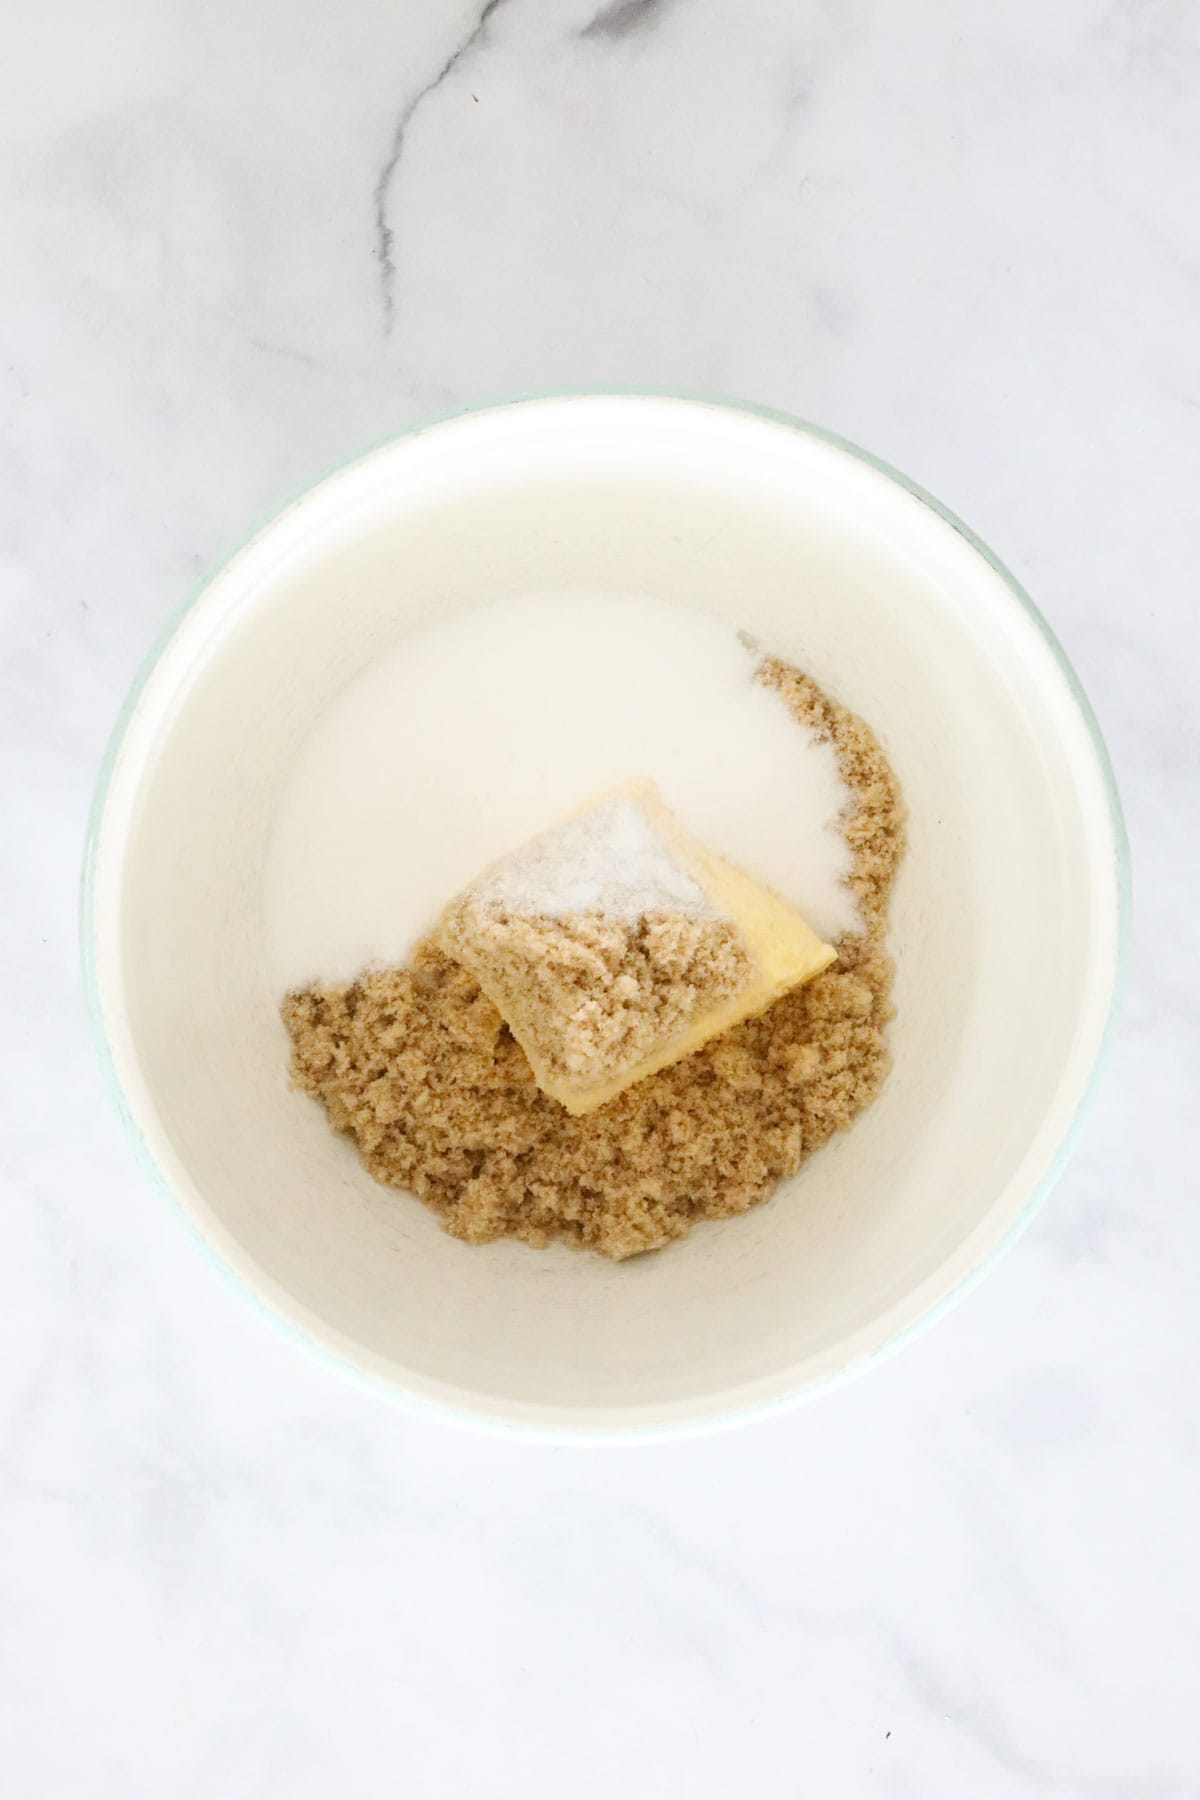 Butter, brown sugar and caster sugar in a mixing bowl.